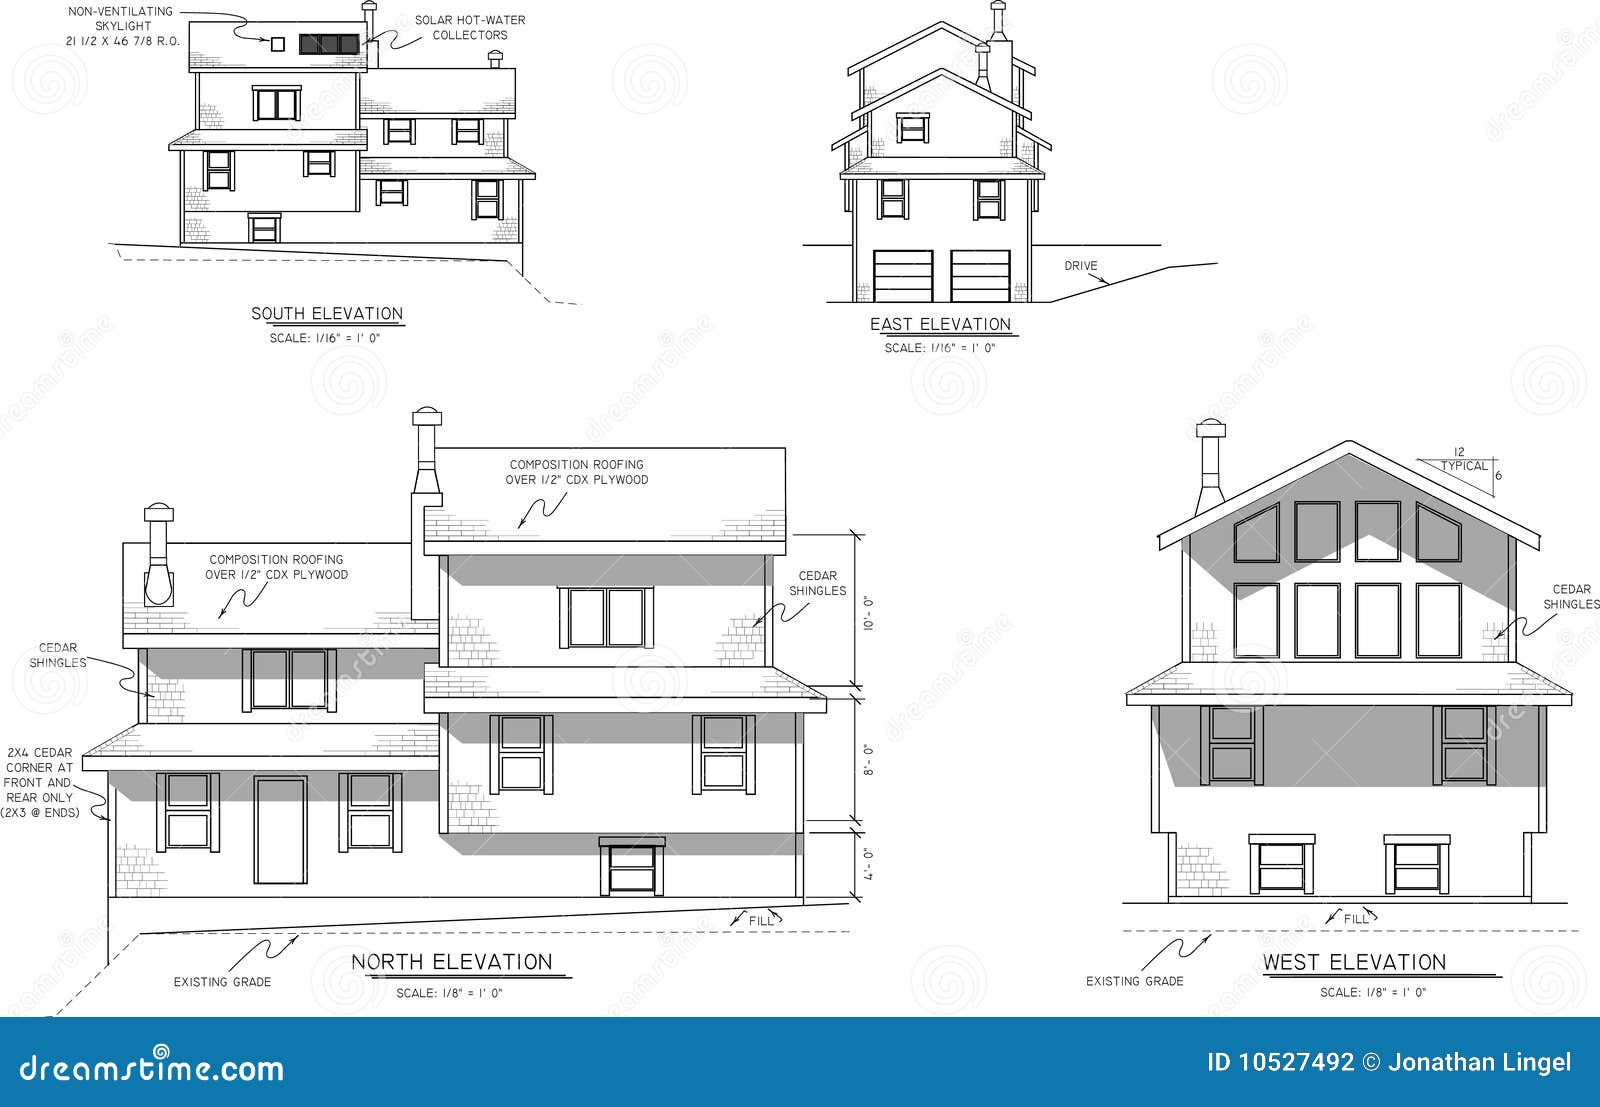 ... which shows the elevation views of a house I designed but never build